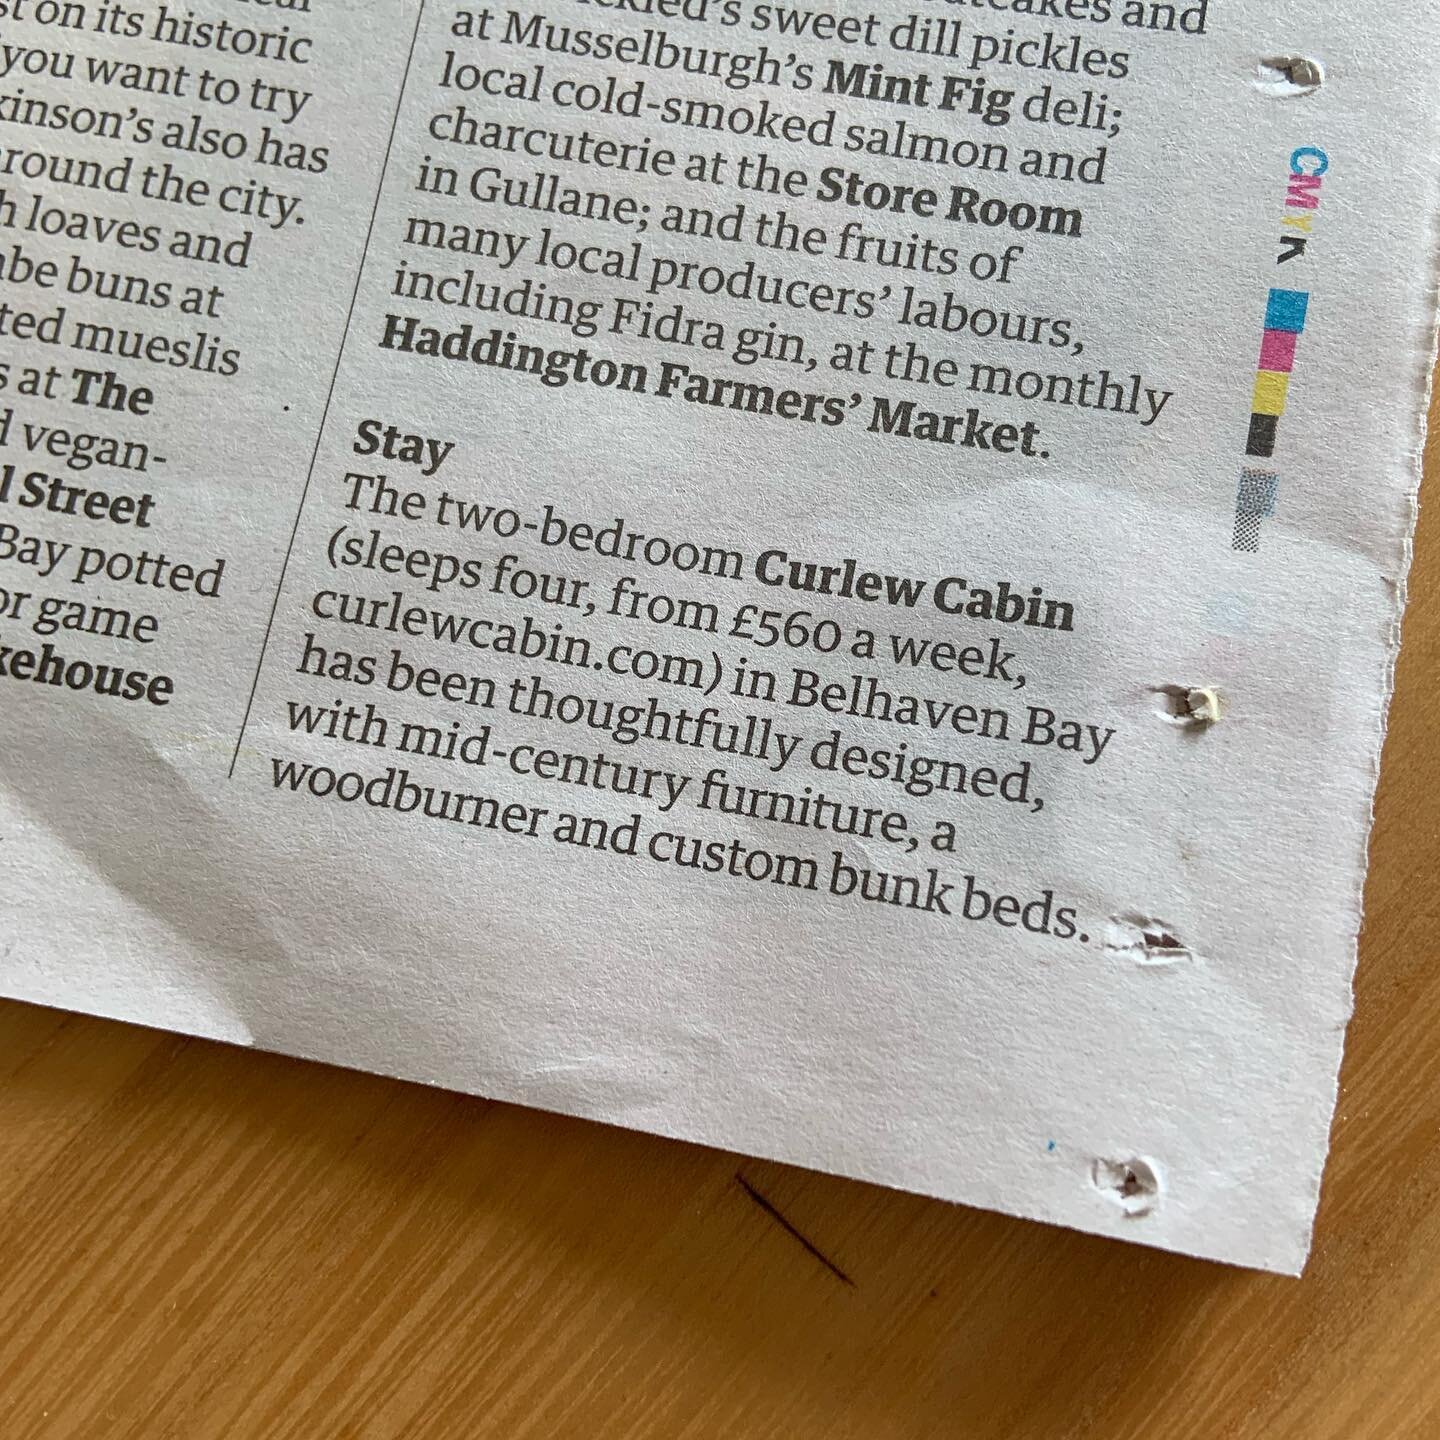 We&rsquo;re in The Guardian today and thrilled to be selected as a place to stay in a food and drink trail of East Lothian. Thank you! We&rsquo;re proud too to be included with some wonderful local restaurants, shops and producers.
If you book direct